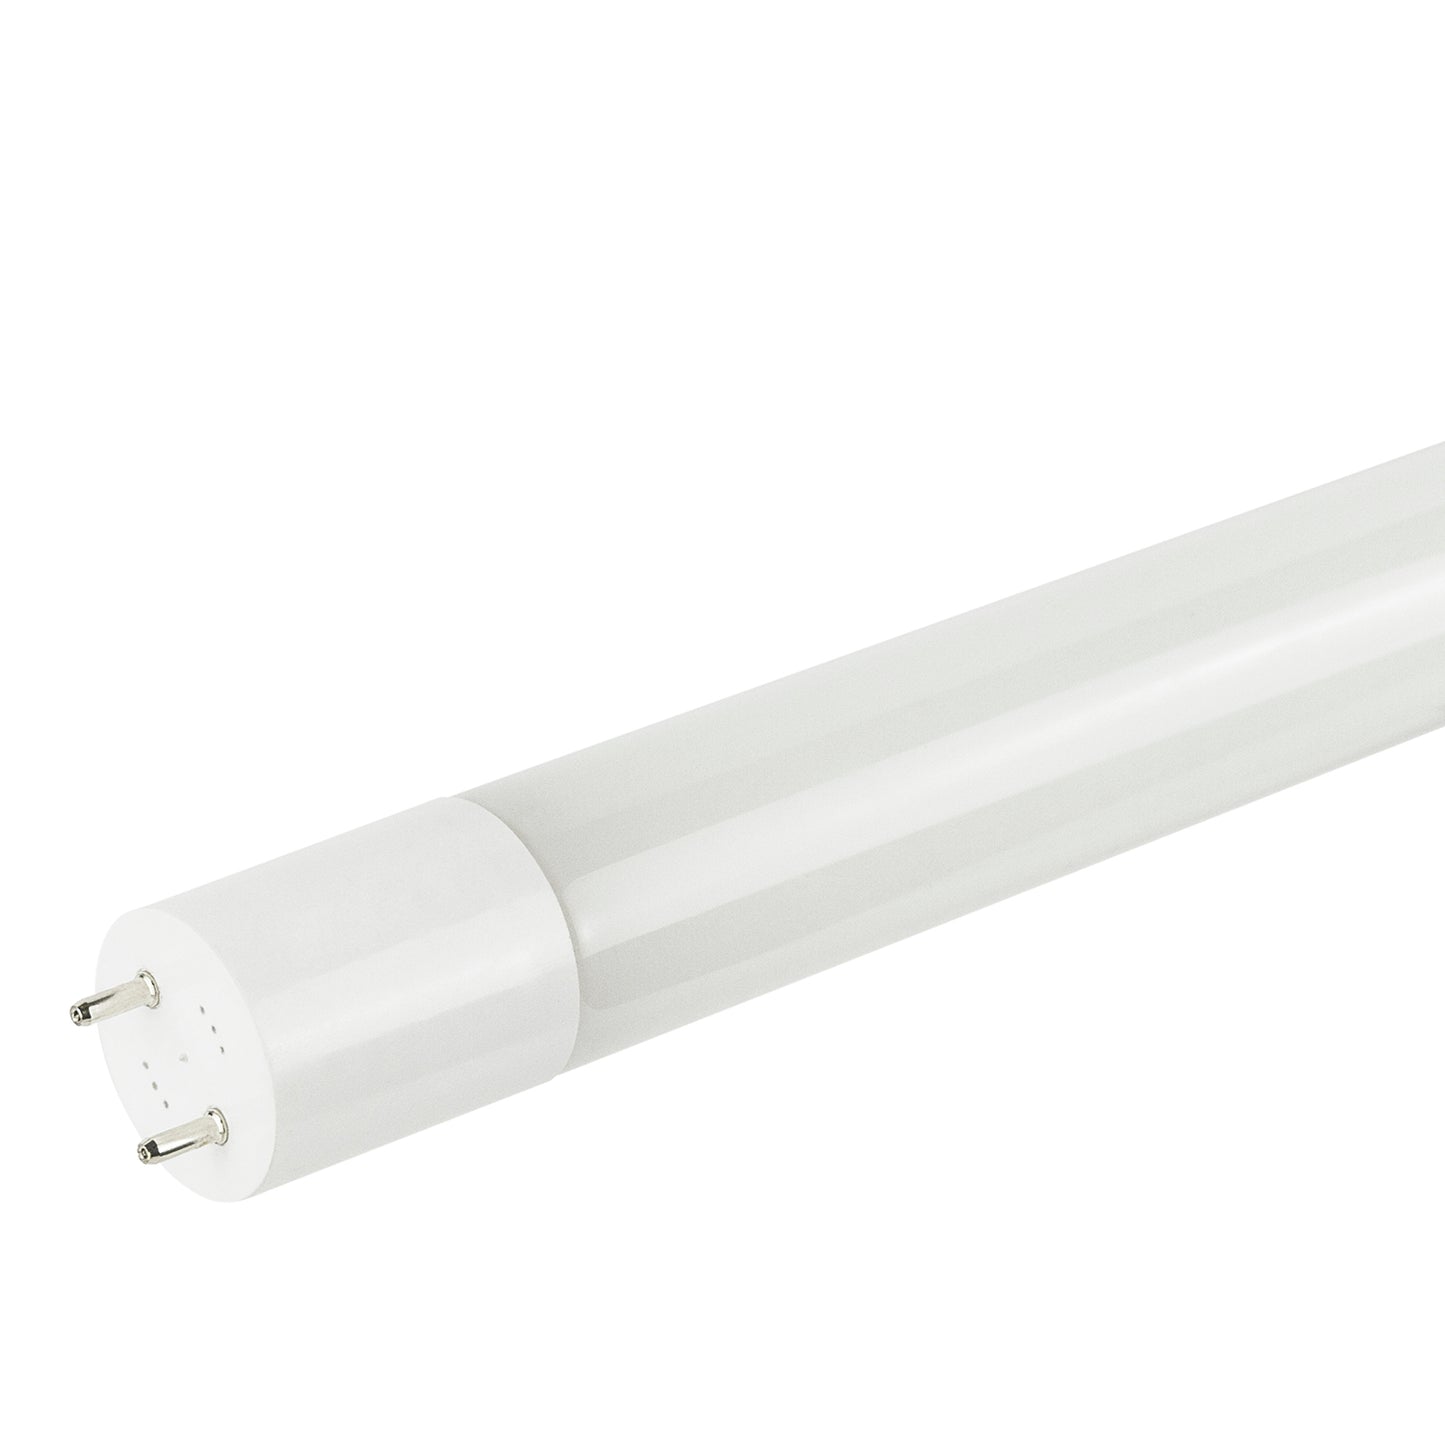 Sunlite 87965 LED T8 Plug & Play Light Tube (Type A) 3 FT, 10 Watt (F25T8 Fluorescent Replacement) 1450 LM, Medium G13 Base, Dual End Connection, Ballast Compatible, 3000K Warm White, 10 Pack